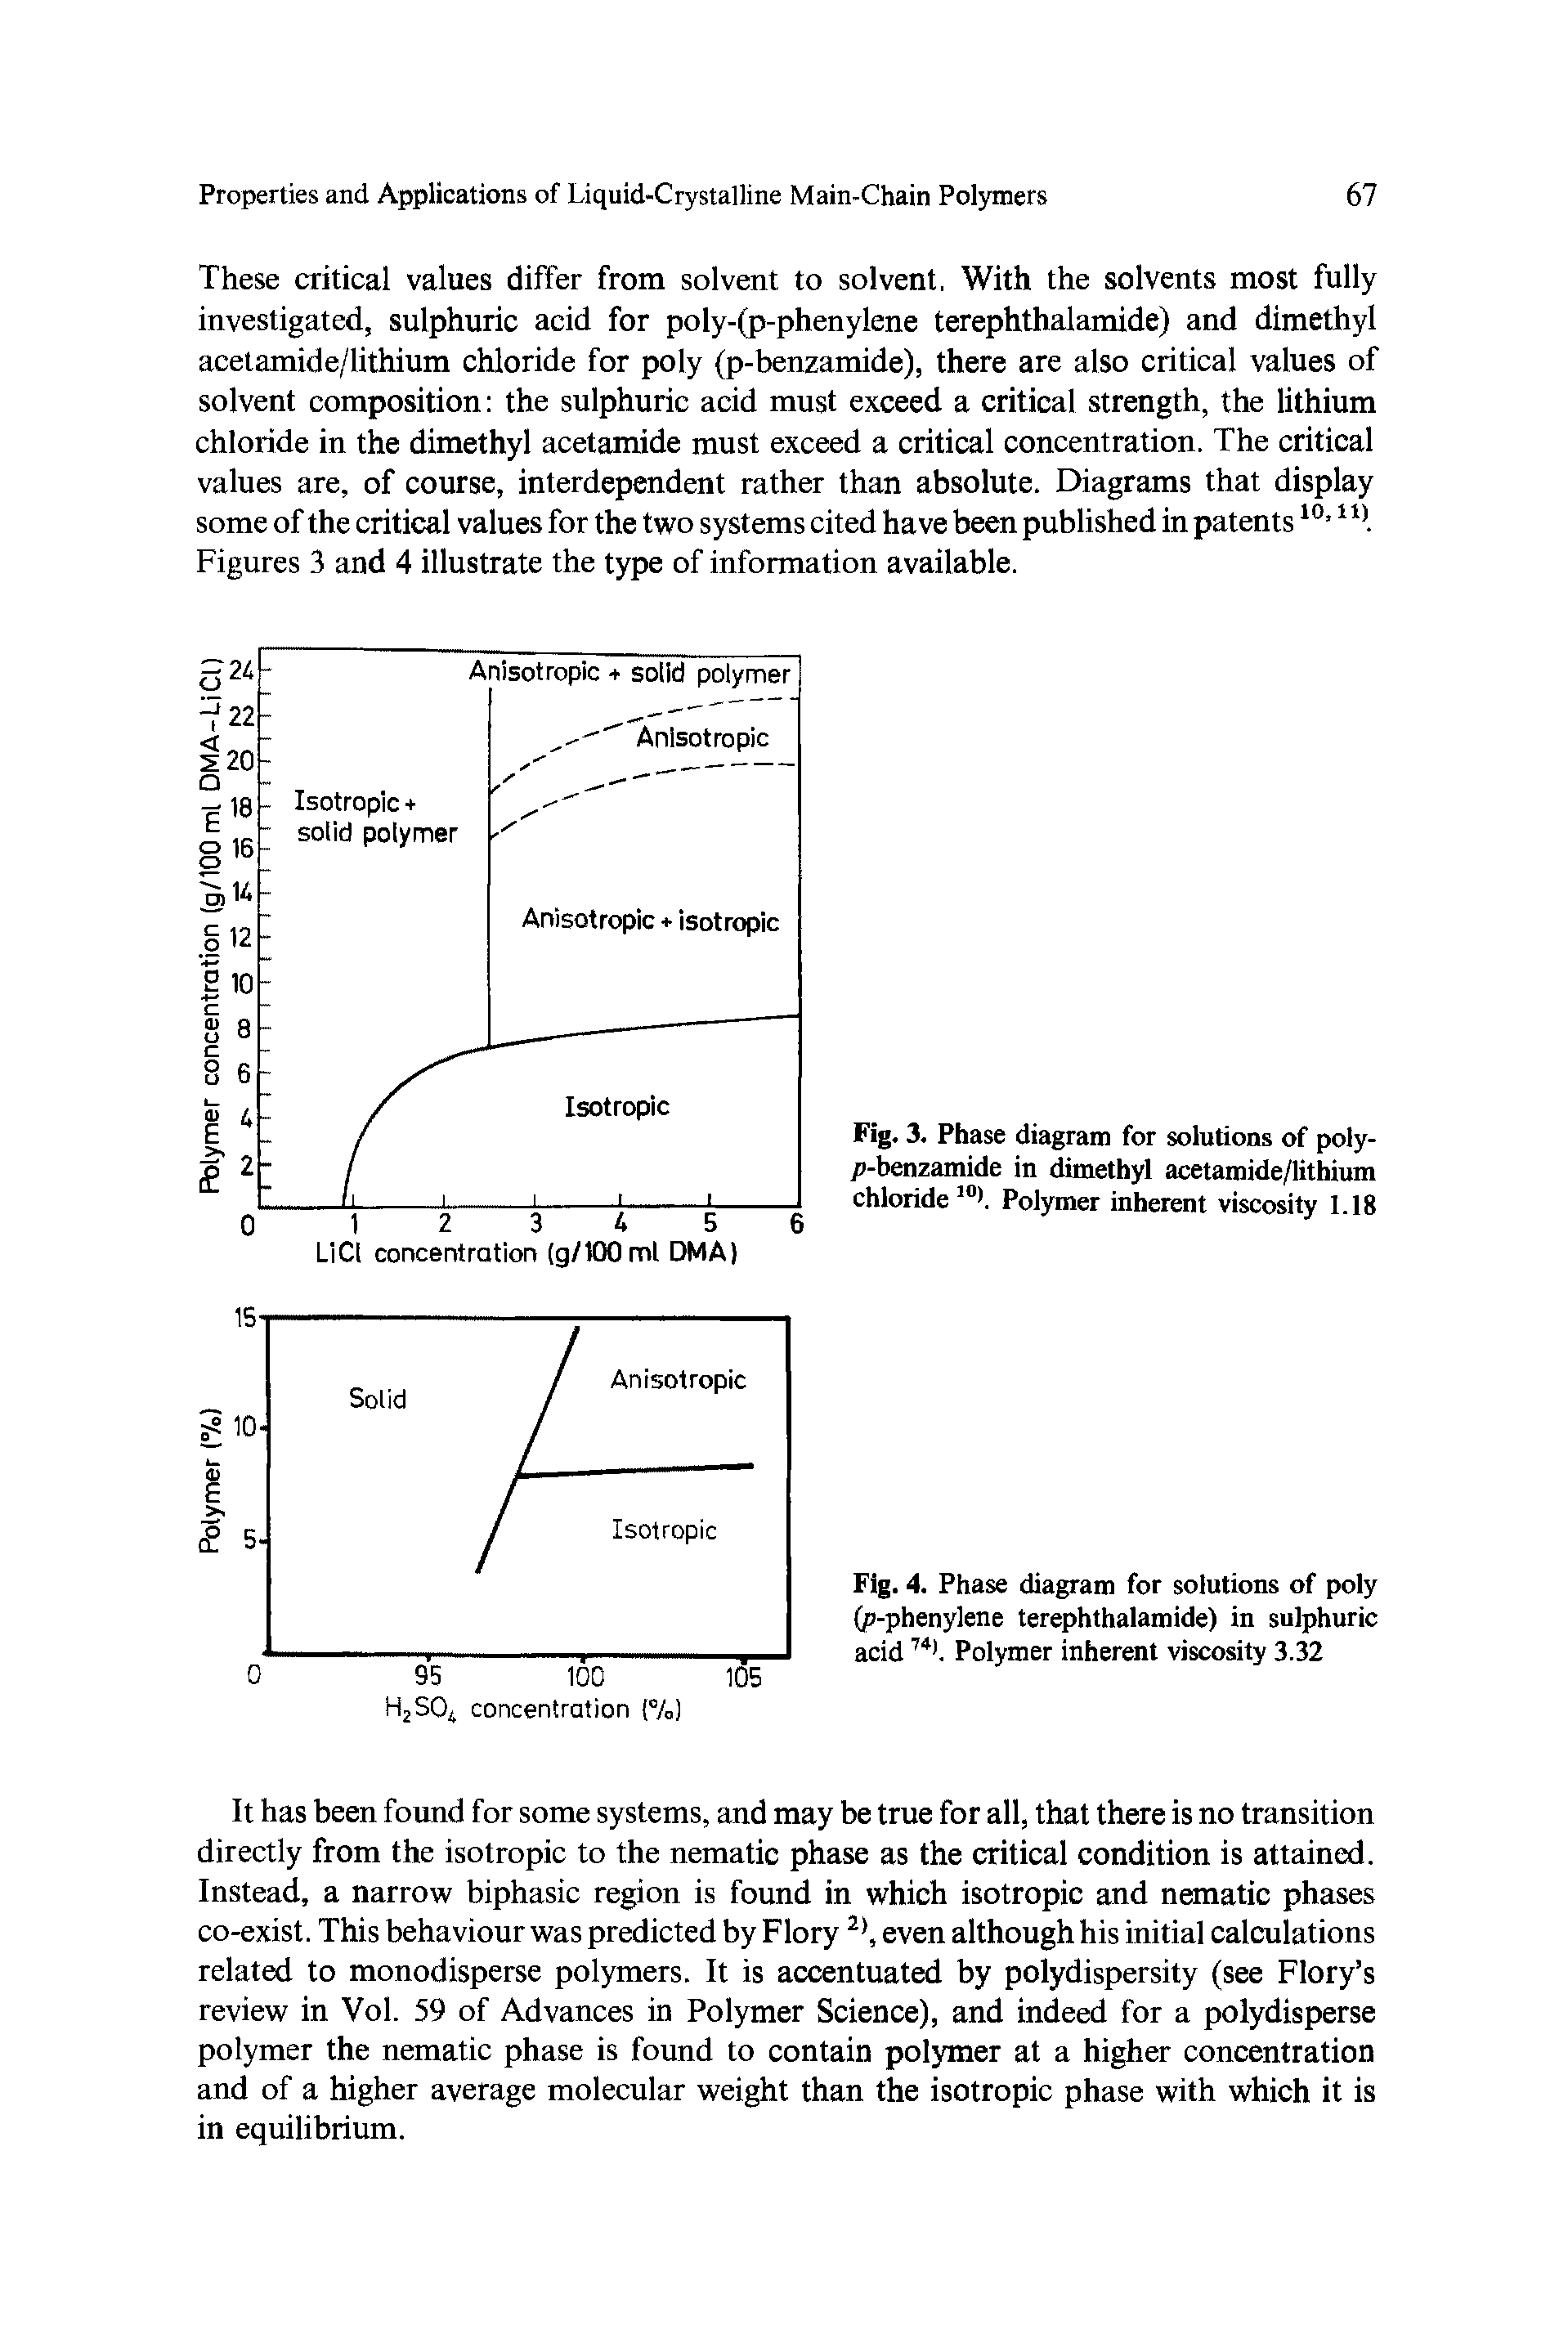 Fig. 3. Phase diagram for solutions of poly-p-benzamide in dimethyl acetamide/lithium chloride I0). Polymer inherent viscosity 1.18...